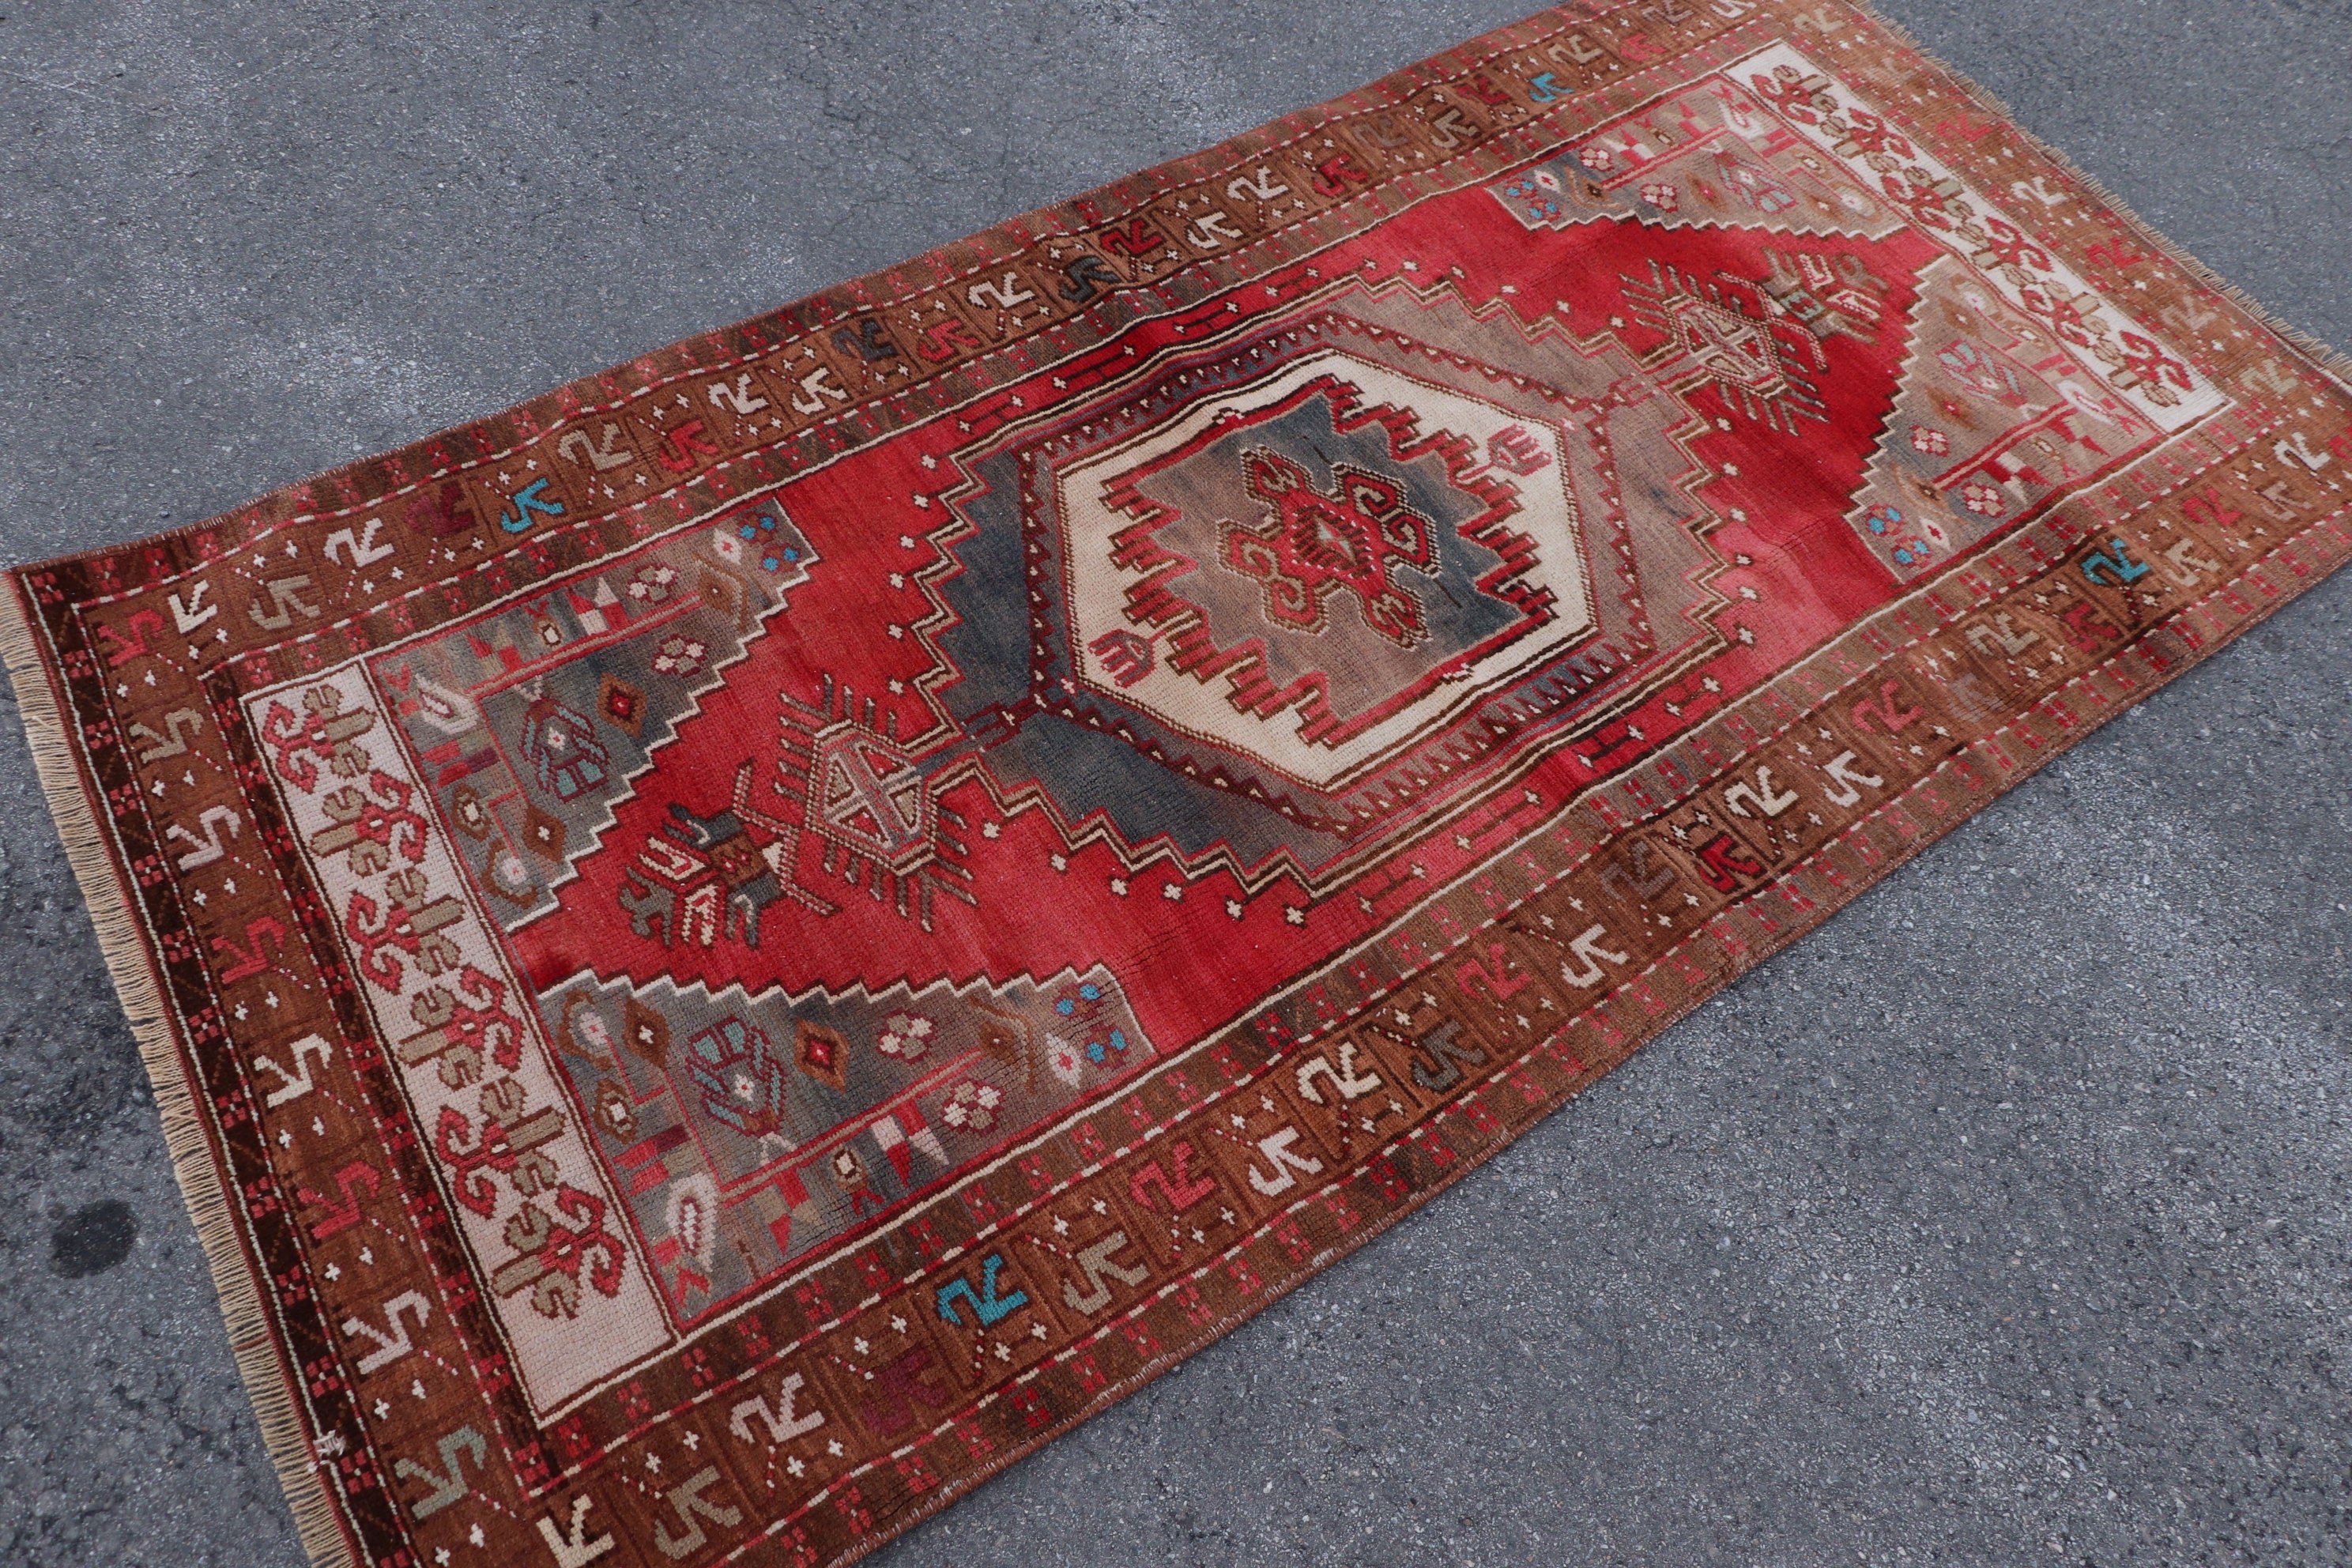 Home Decor Rug, Vintage Rugs, Turkish Rugs, Kitchen Rugs, Bright Rugs, Bedroom Rugs, Red Floor Rug, 3.2x6.5 ft Accent Rug